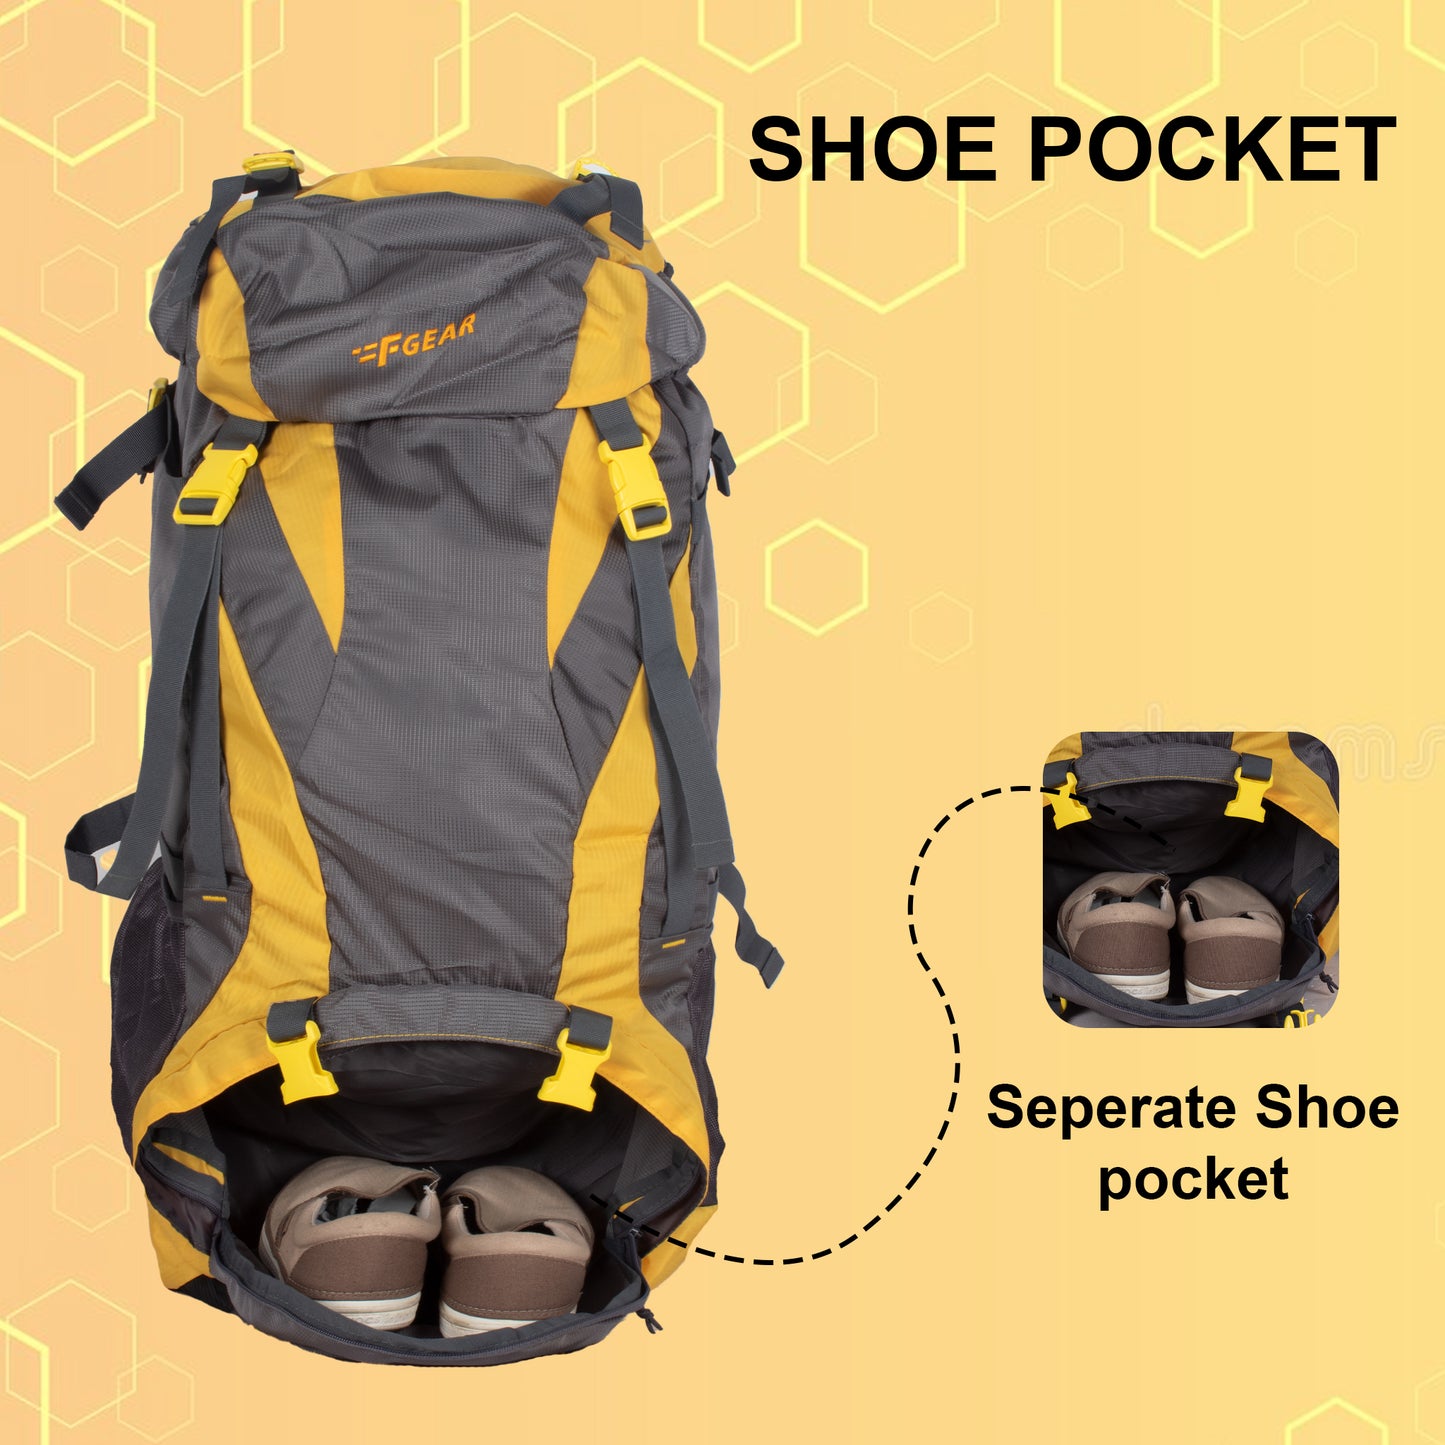 Penny 75L Yellow Gry Rucksack with Rain Cover